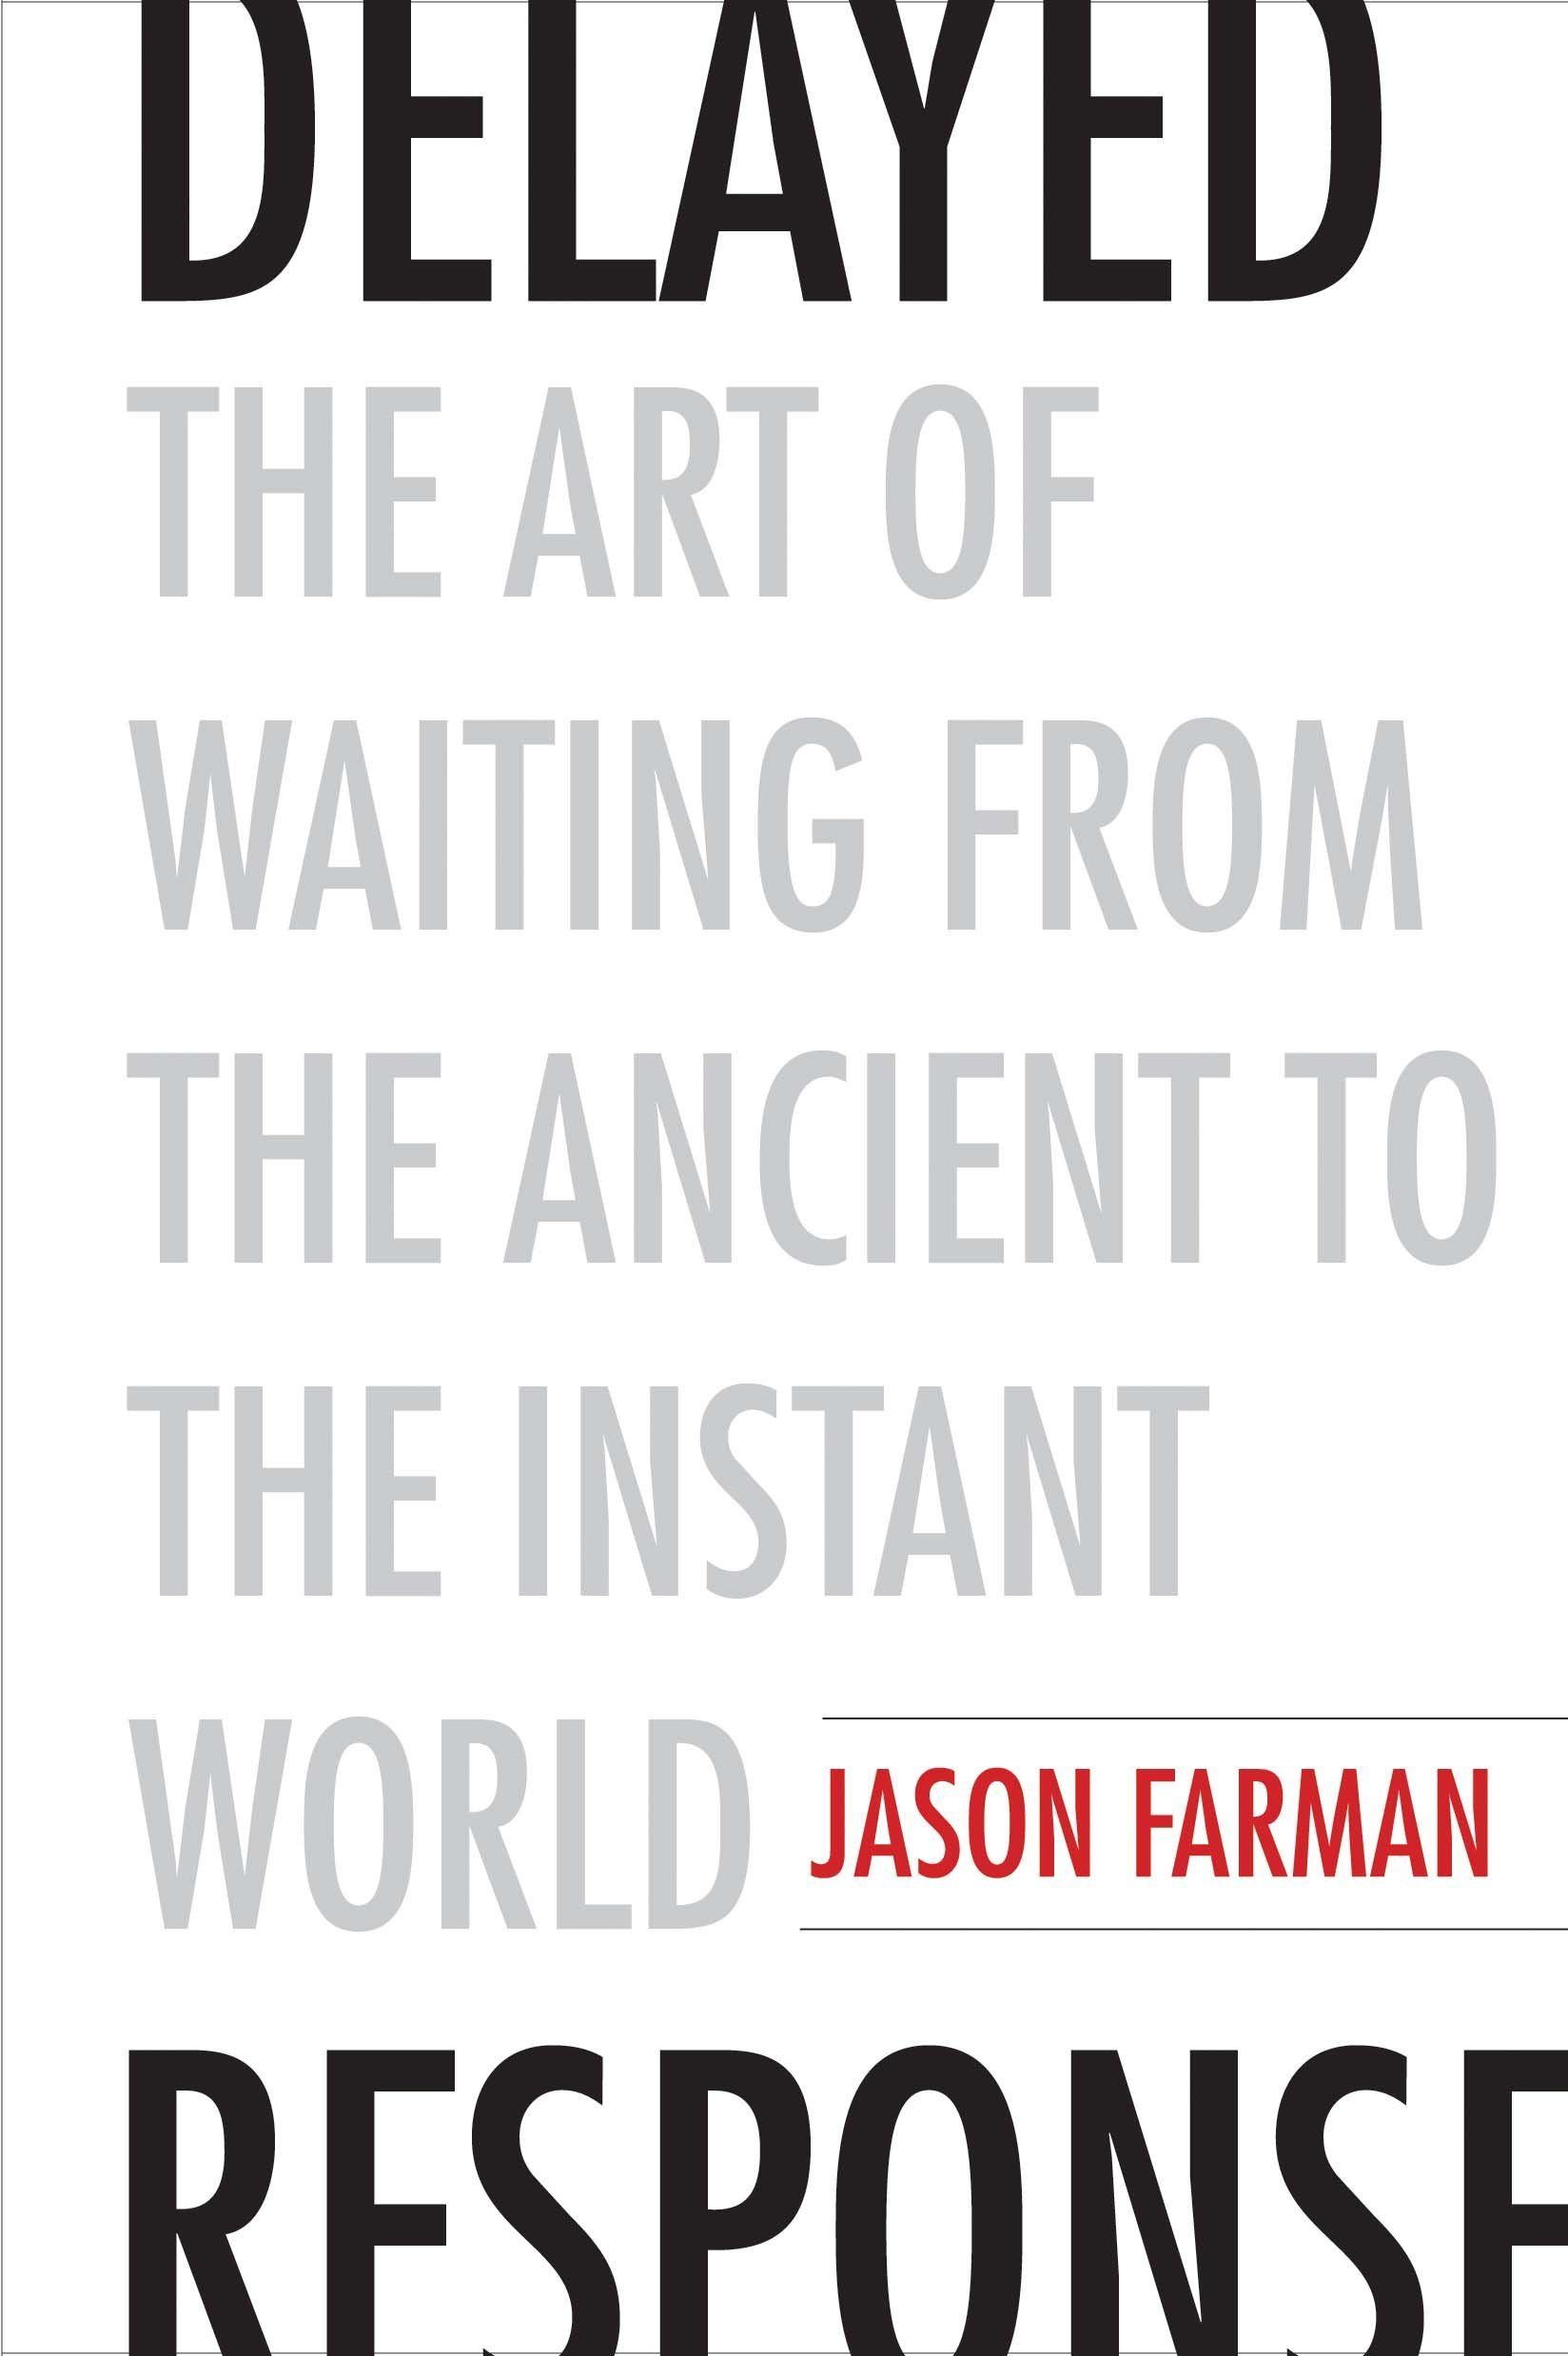 I Hate to Wait: On Jason Farman’s “Delayed Response: The Art of Waiting from the Ancient to the Instant World”